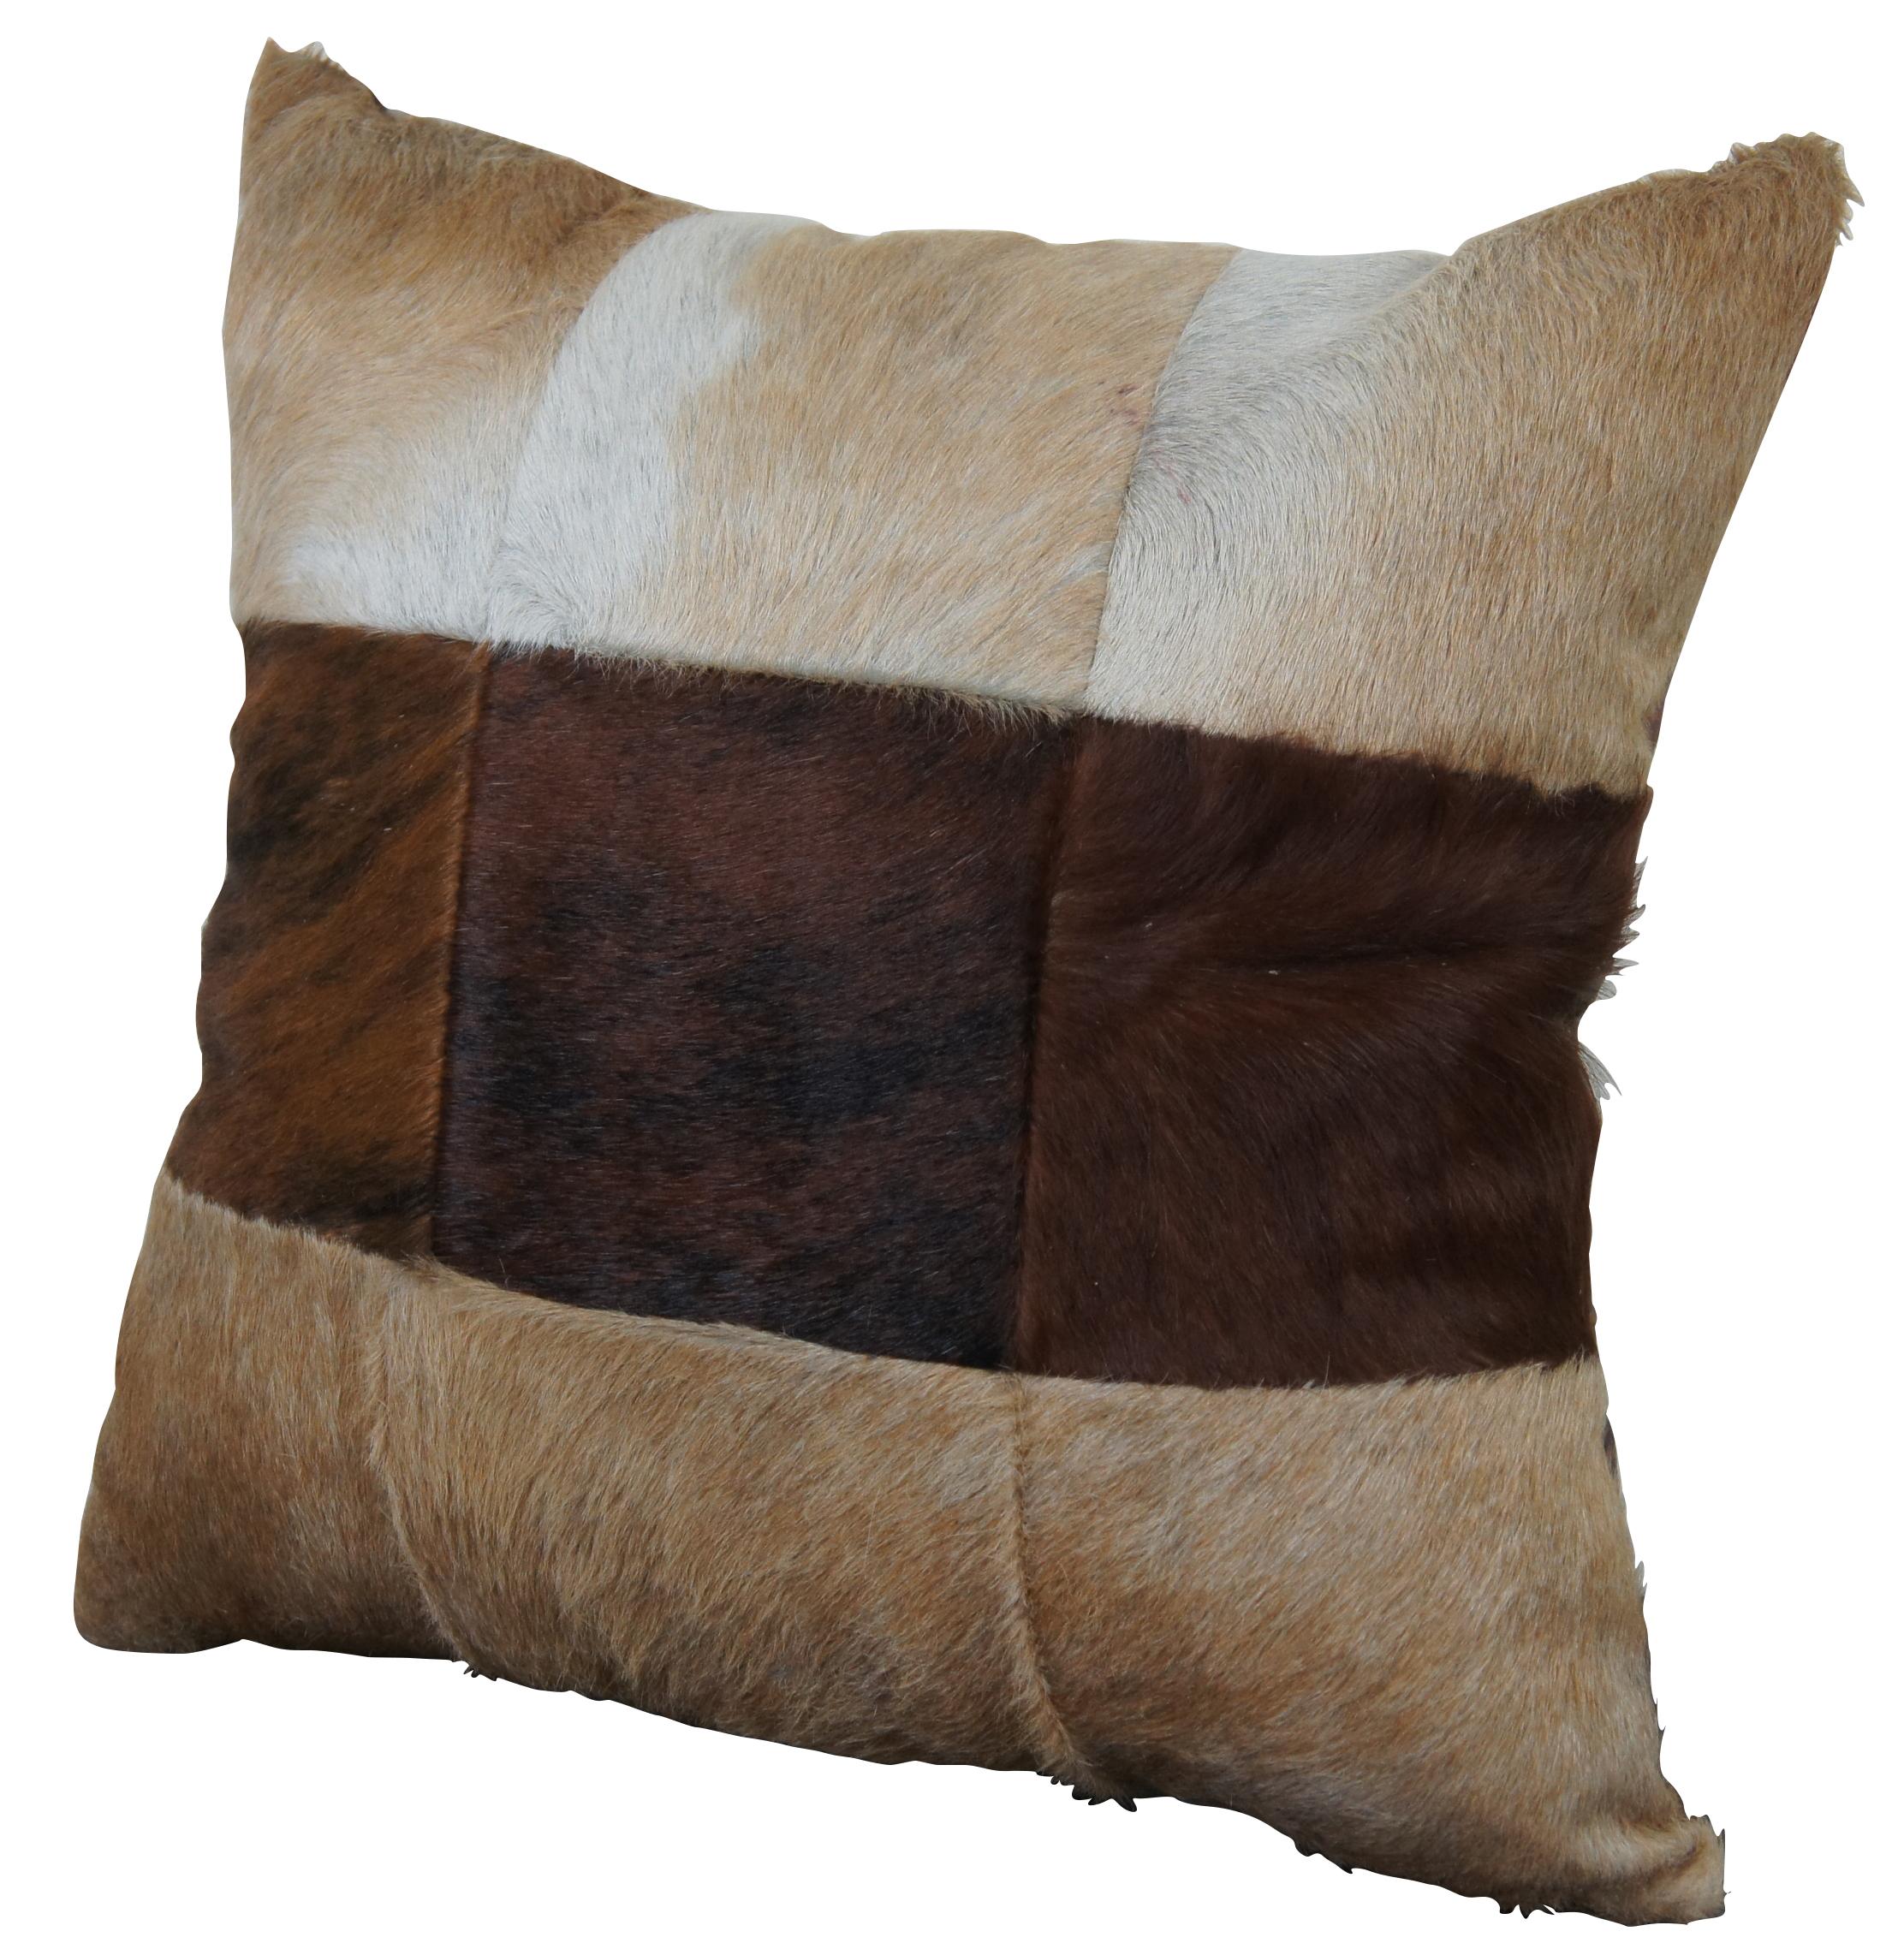 Nine square multi-tone patchwork throw pillow in cow hide fur and leather, filled with small pieces of upholstery foam. Measure: 19